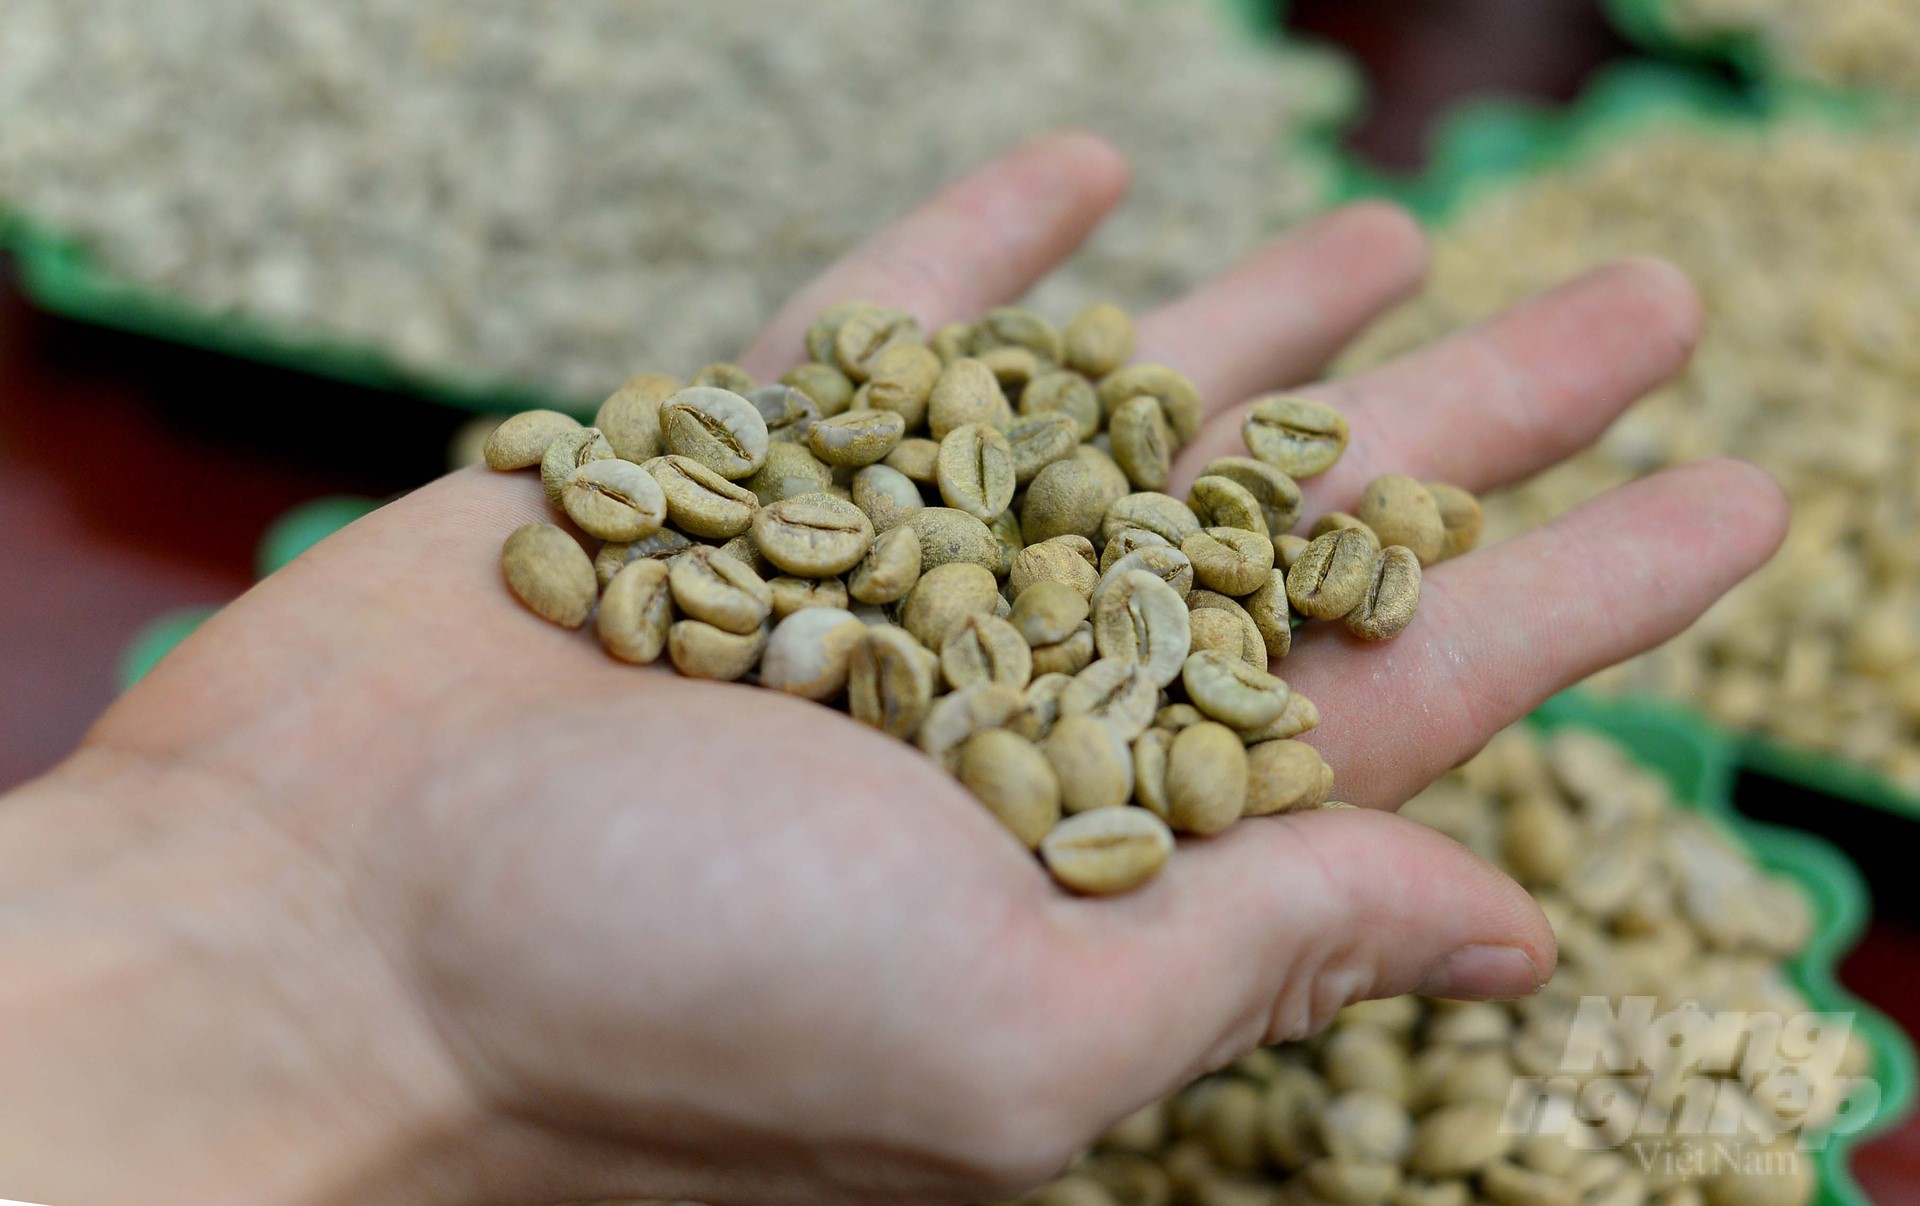 Coffee is one of the key crops in Lam Dong province. Each year, this locality exports about 90,000 tons, with a value of over USD 175 million. Photo: Minh Hau.